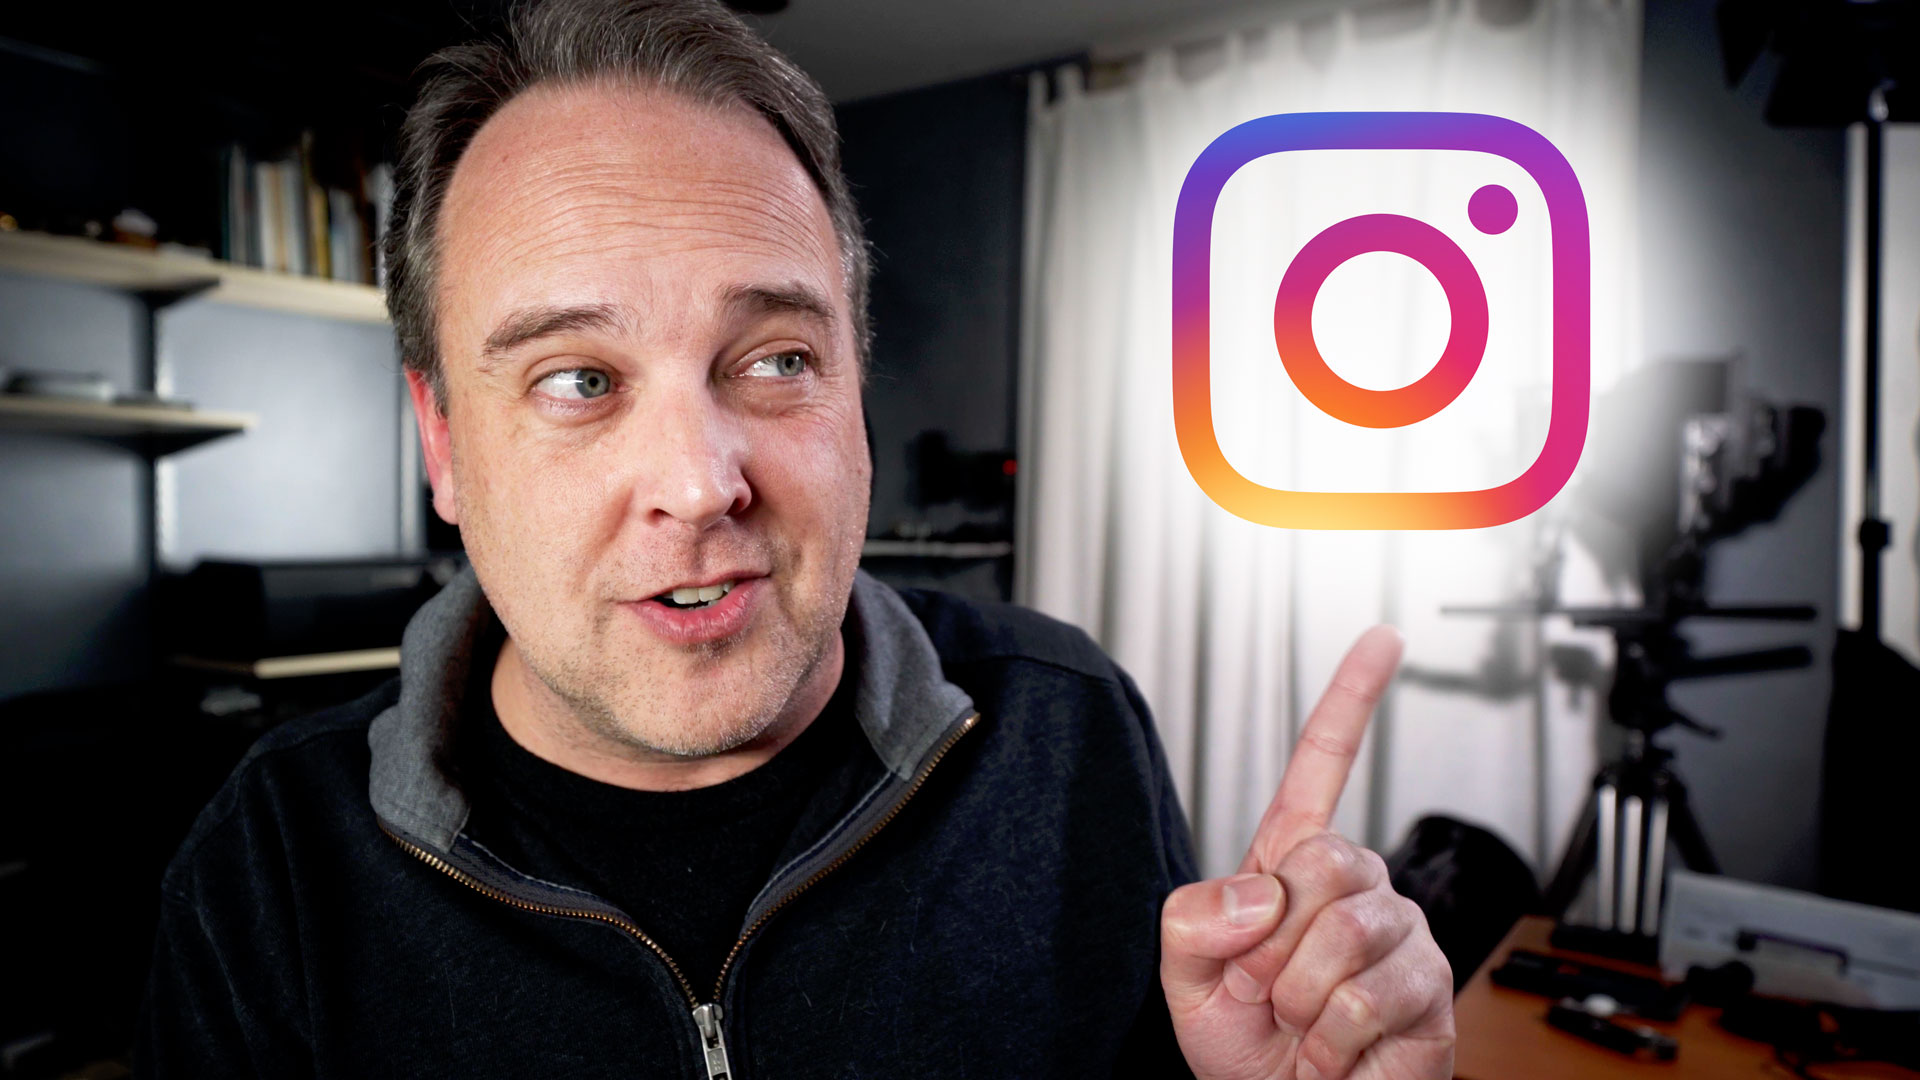 Fired from CANON! The Instagram Problem